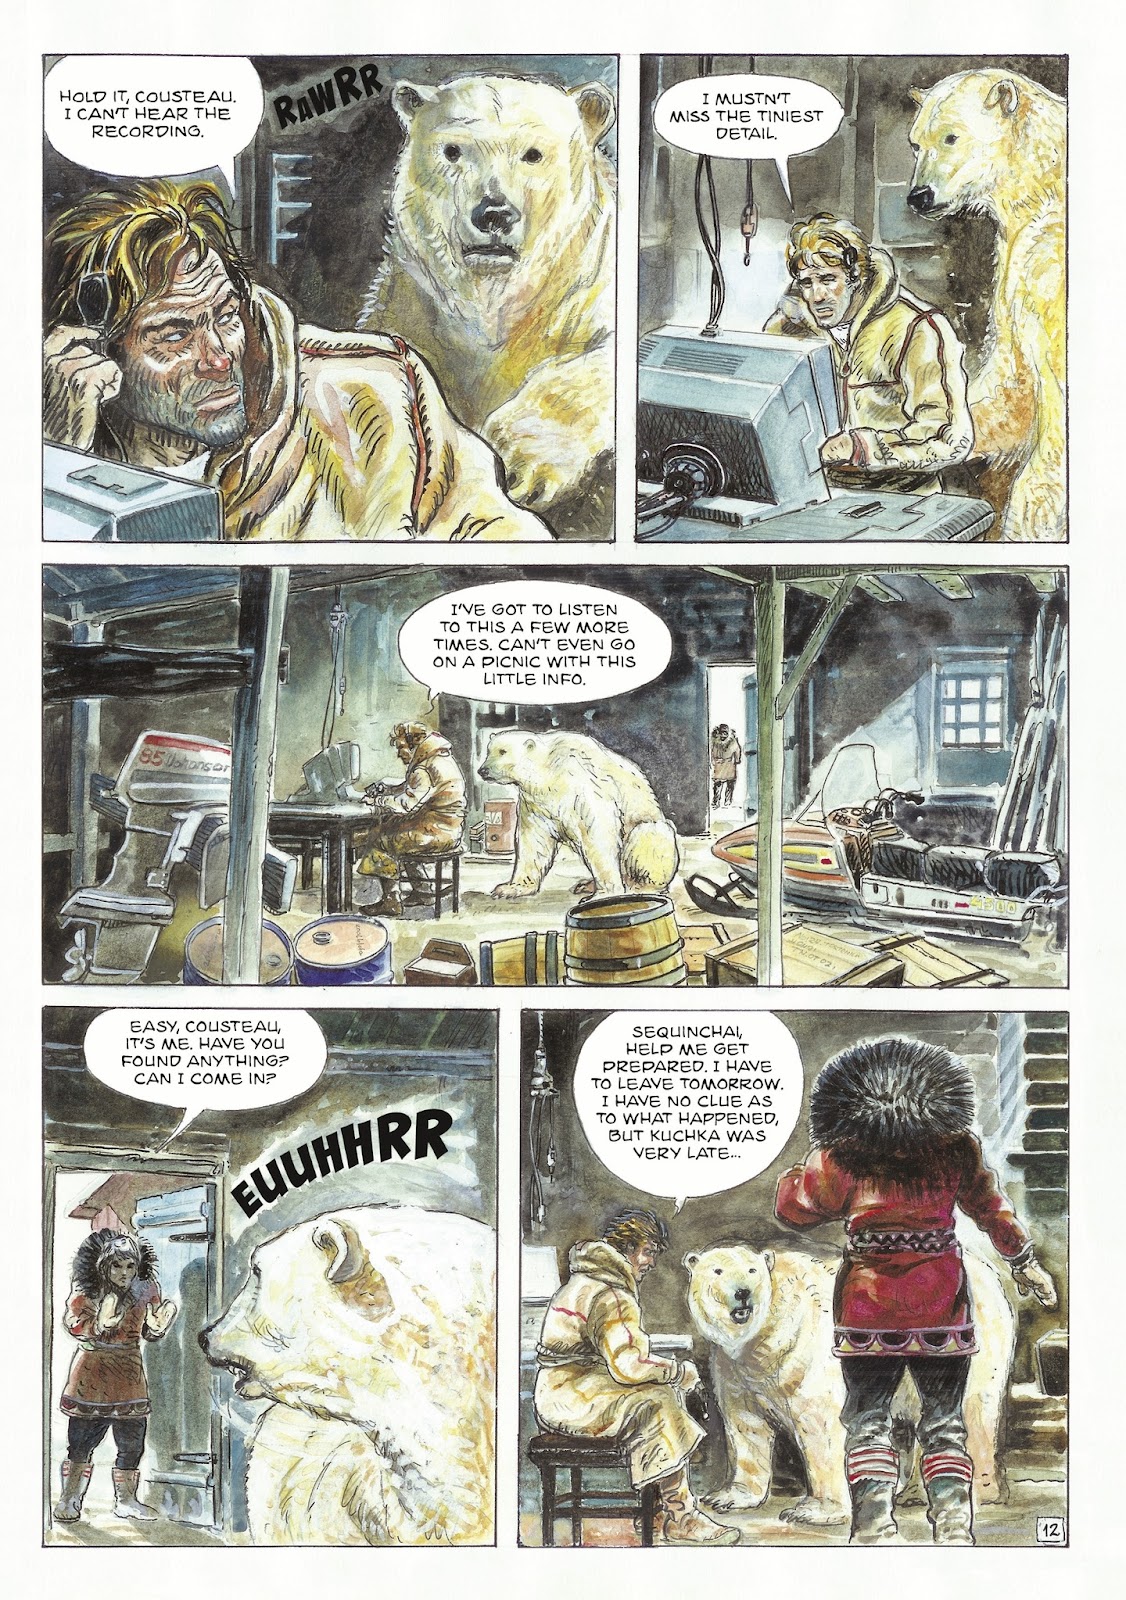 The Man With the Bear issue 1 - Page 14